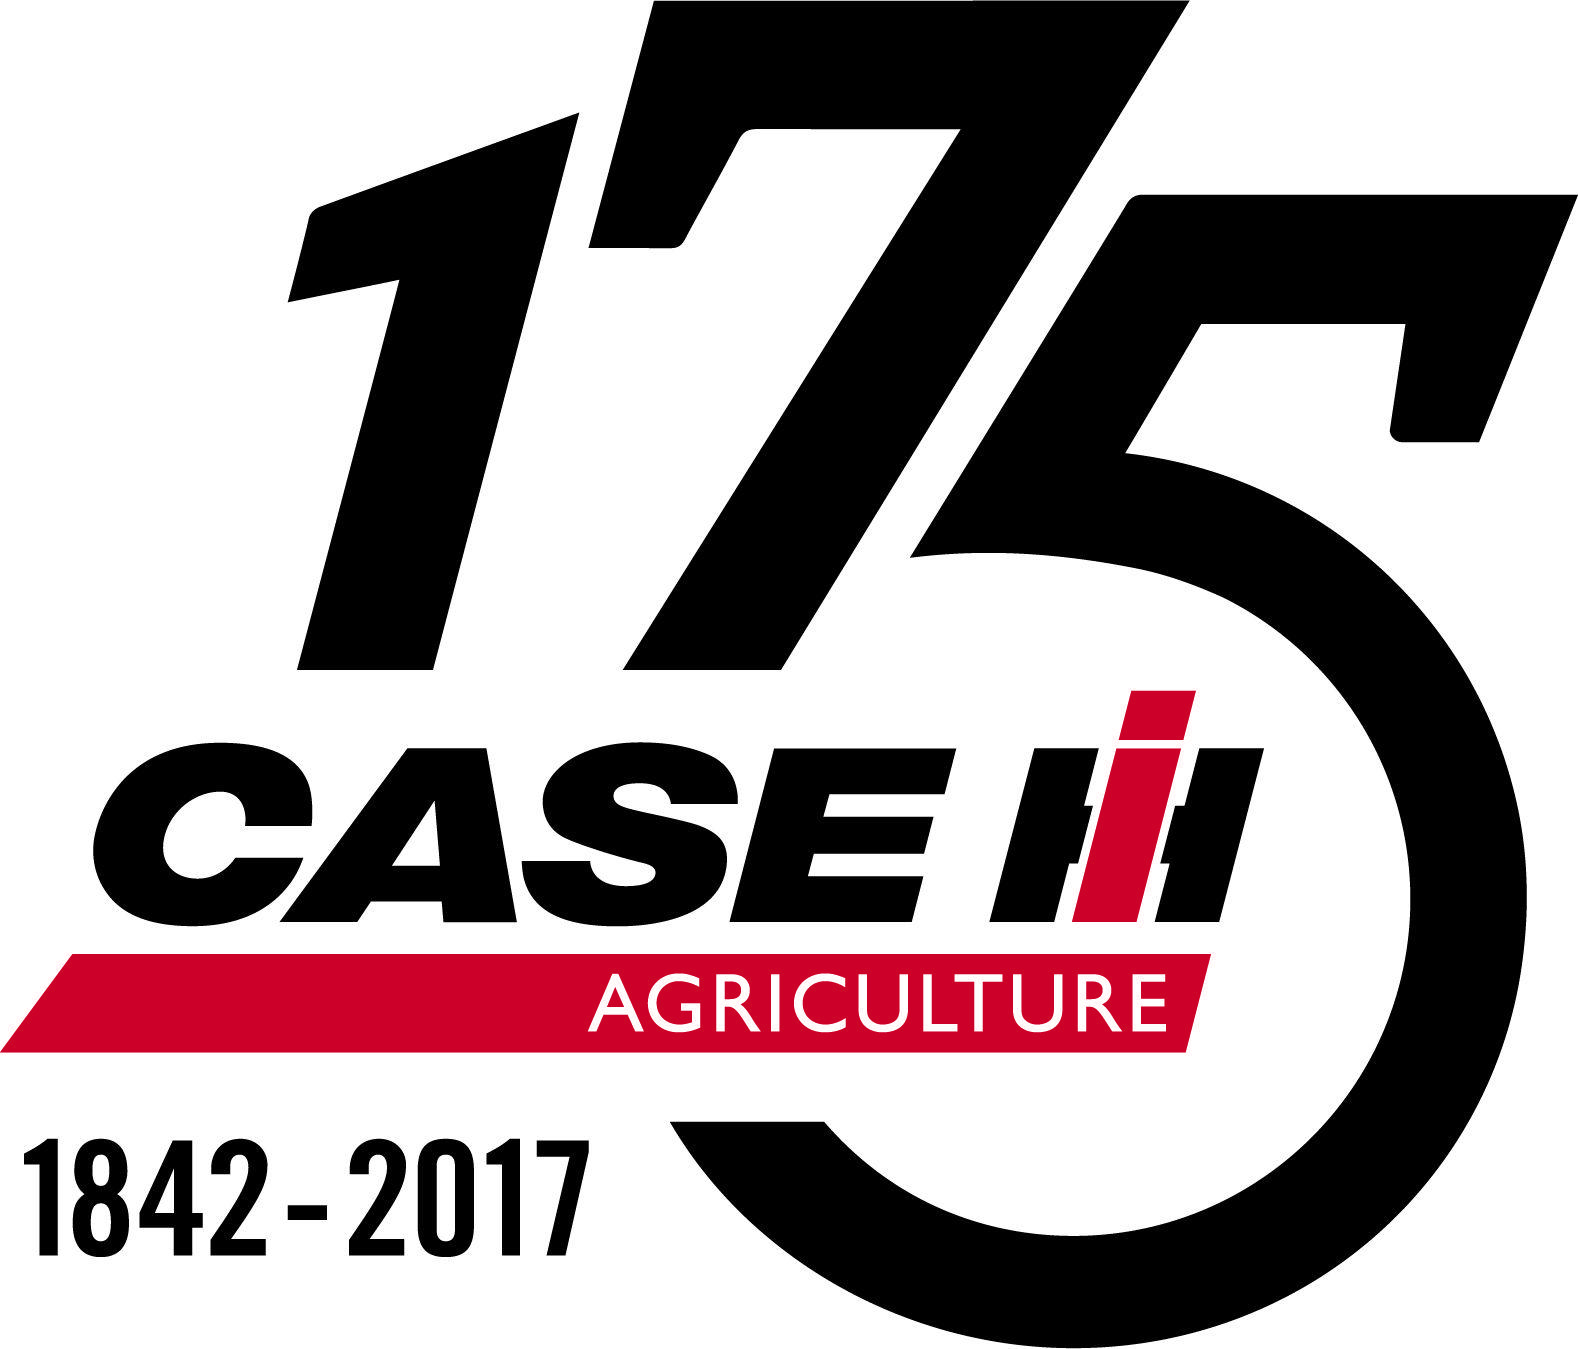 Case IH Logo - Celebrating 175 Years of Cutting Edge Agricultural Equipment